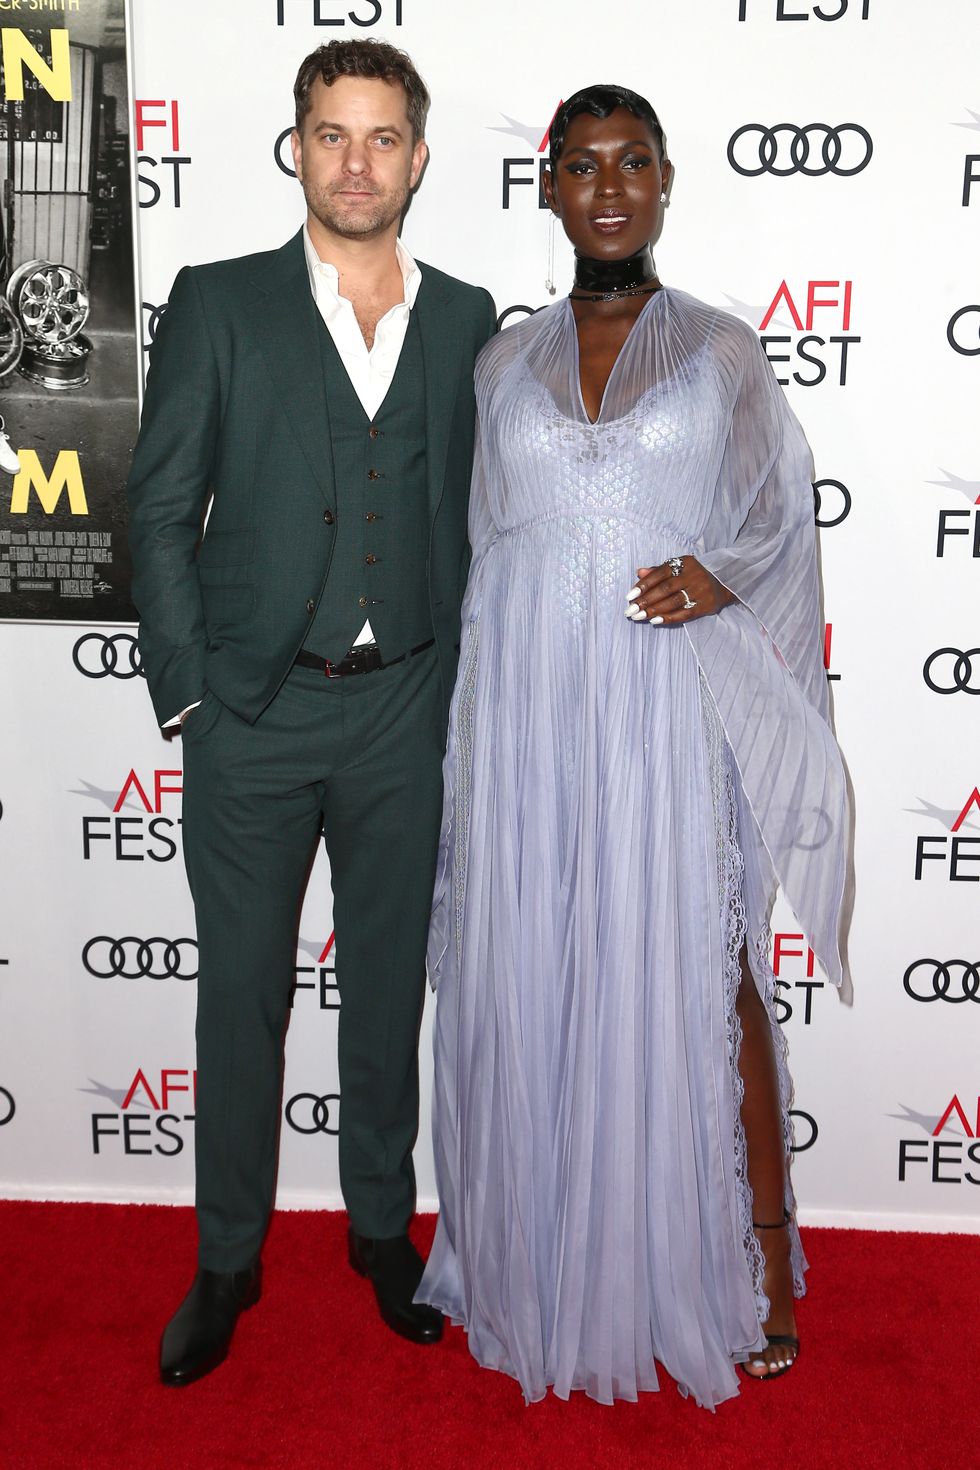 afi fest 2019 presented by audi "queen and slim" premiere arrivals